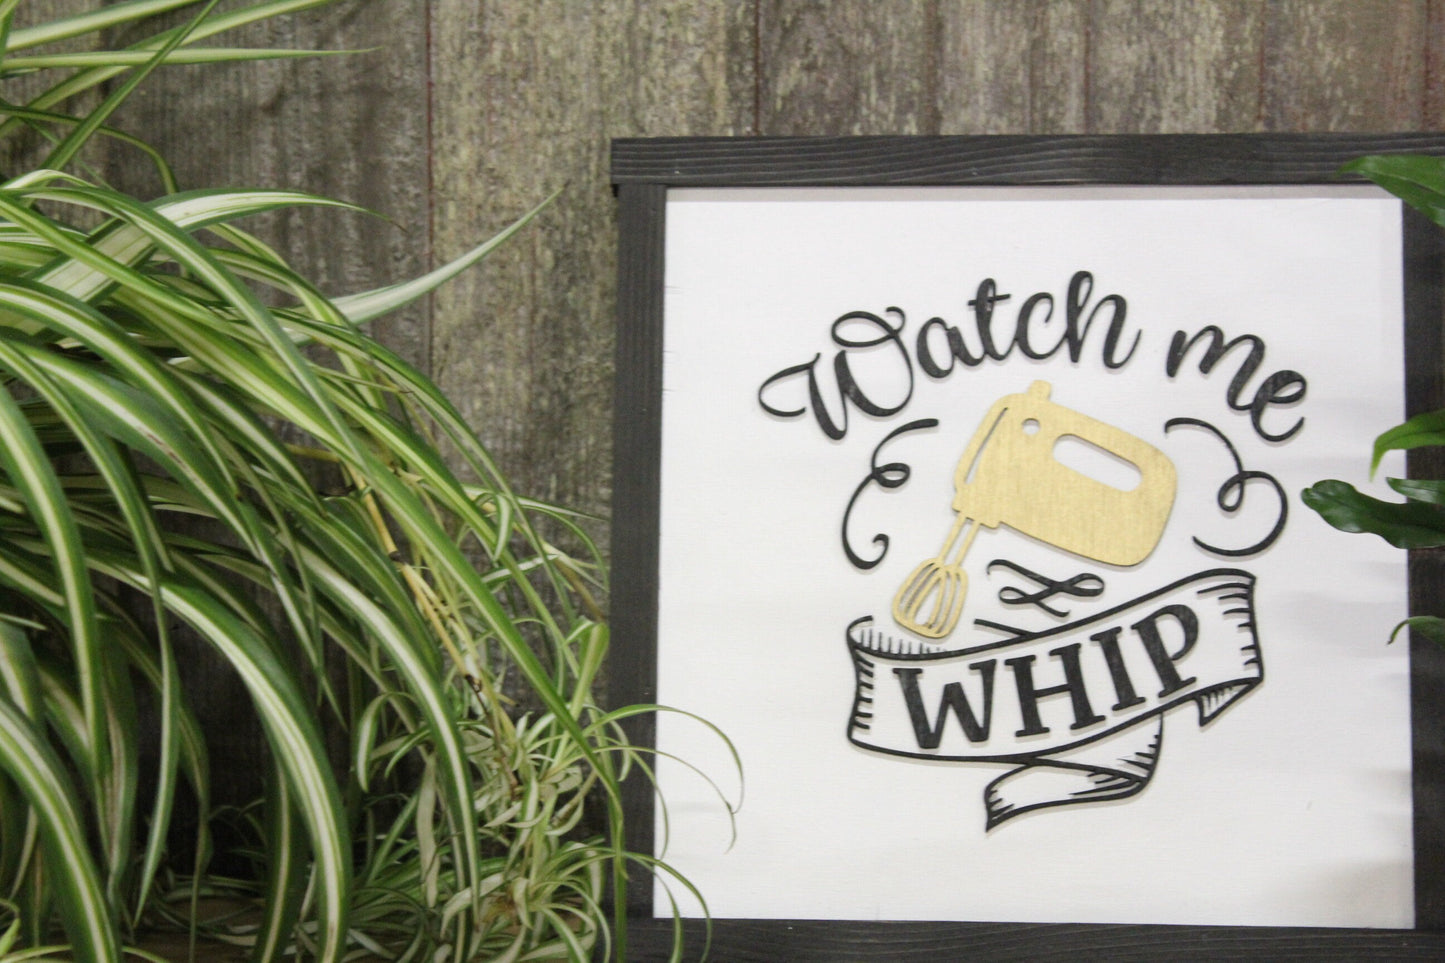 Watch Me Whip Kitchen Cooking Baking Mixer Fun Wall Decor Sign Primitive County Rustic Gift Warm Funny Handmade Dishes Cakery